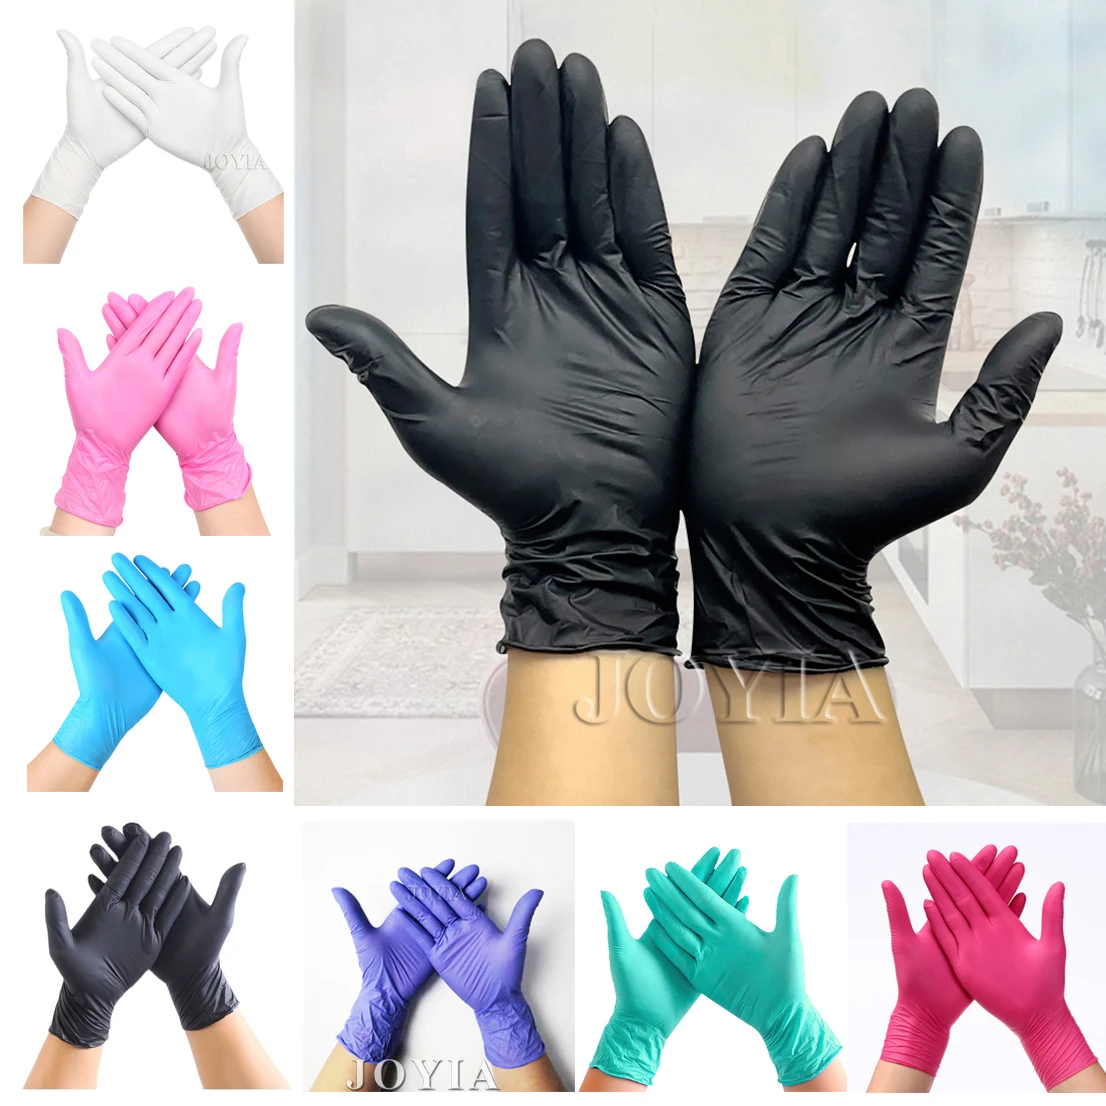 Black Gloves Disposable Latex Free Powder-Free Exam Glove Size Small Medium Large X-Large Nitrile Vinyl Synthetic Hand S M XL